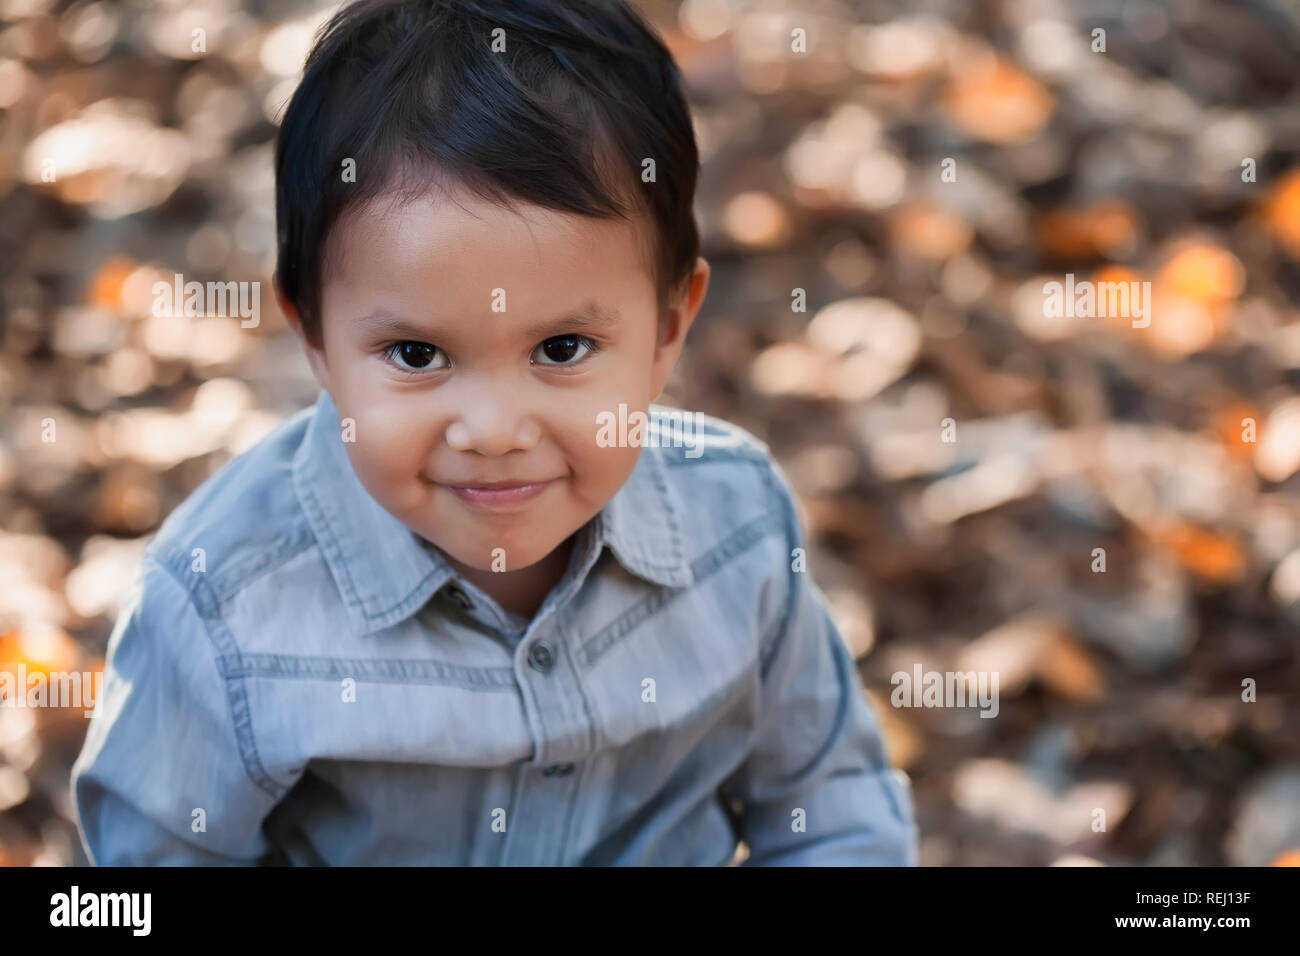 A young latino boy with a cute smile looking thoughful and friendly in a field of dried leaves during fall. Stock Photo